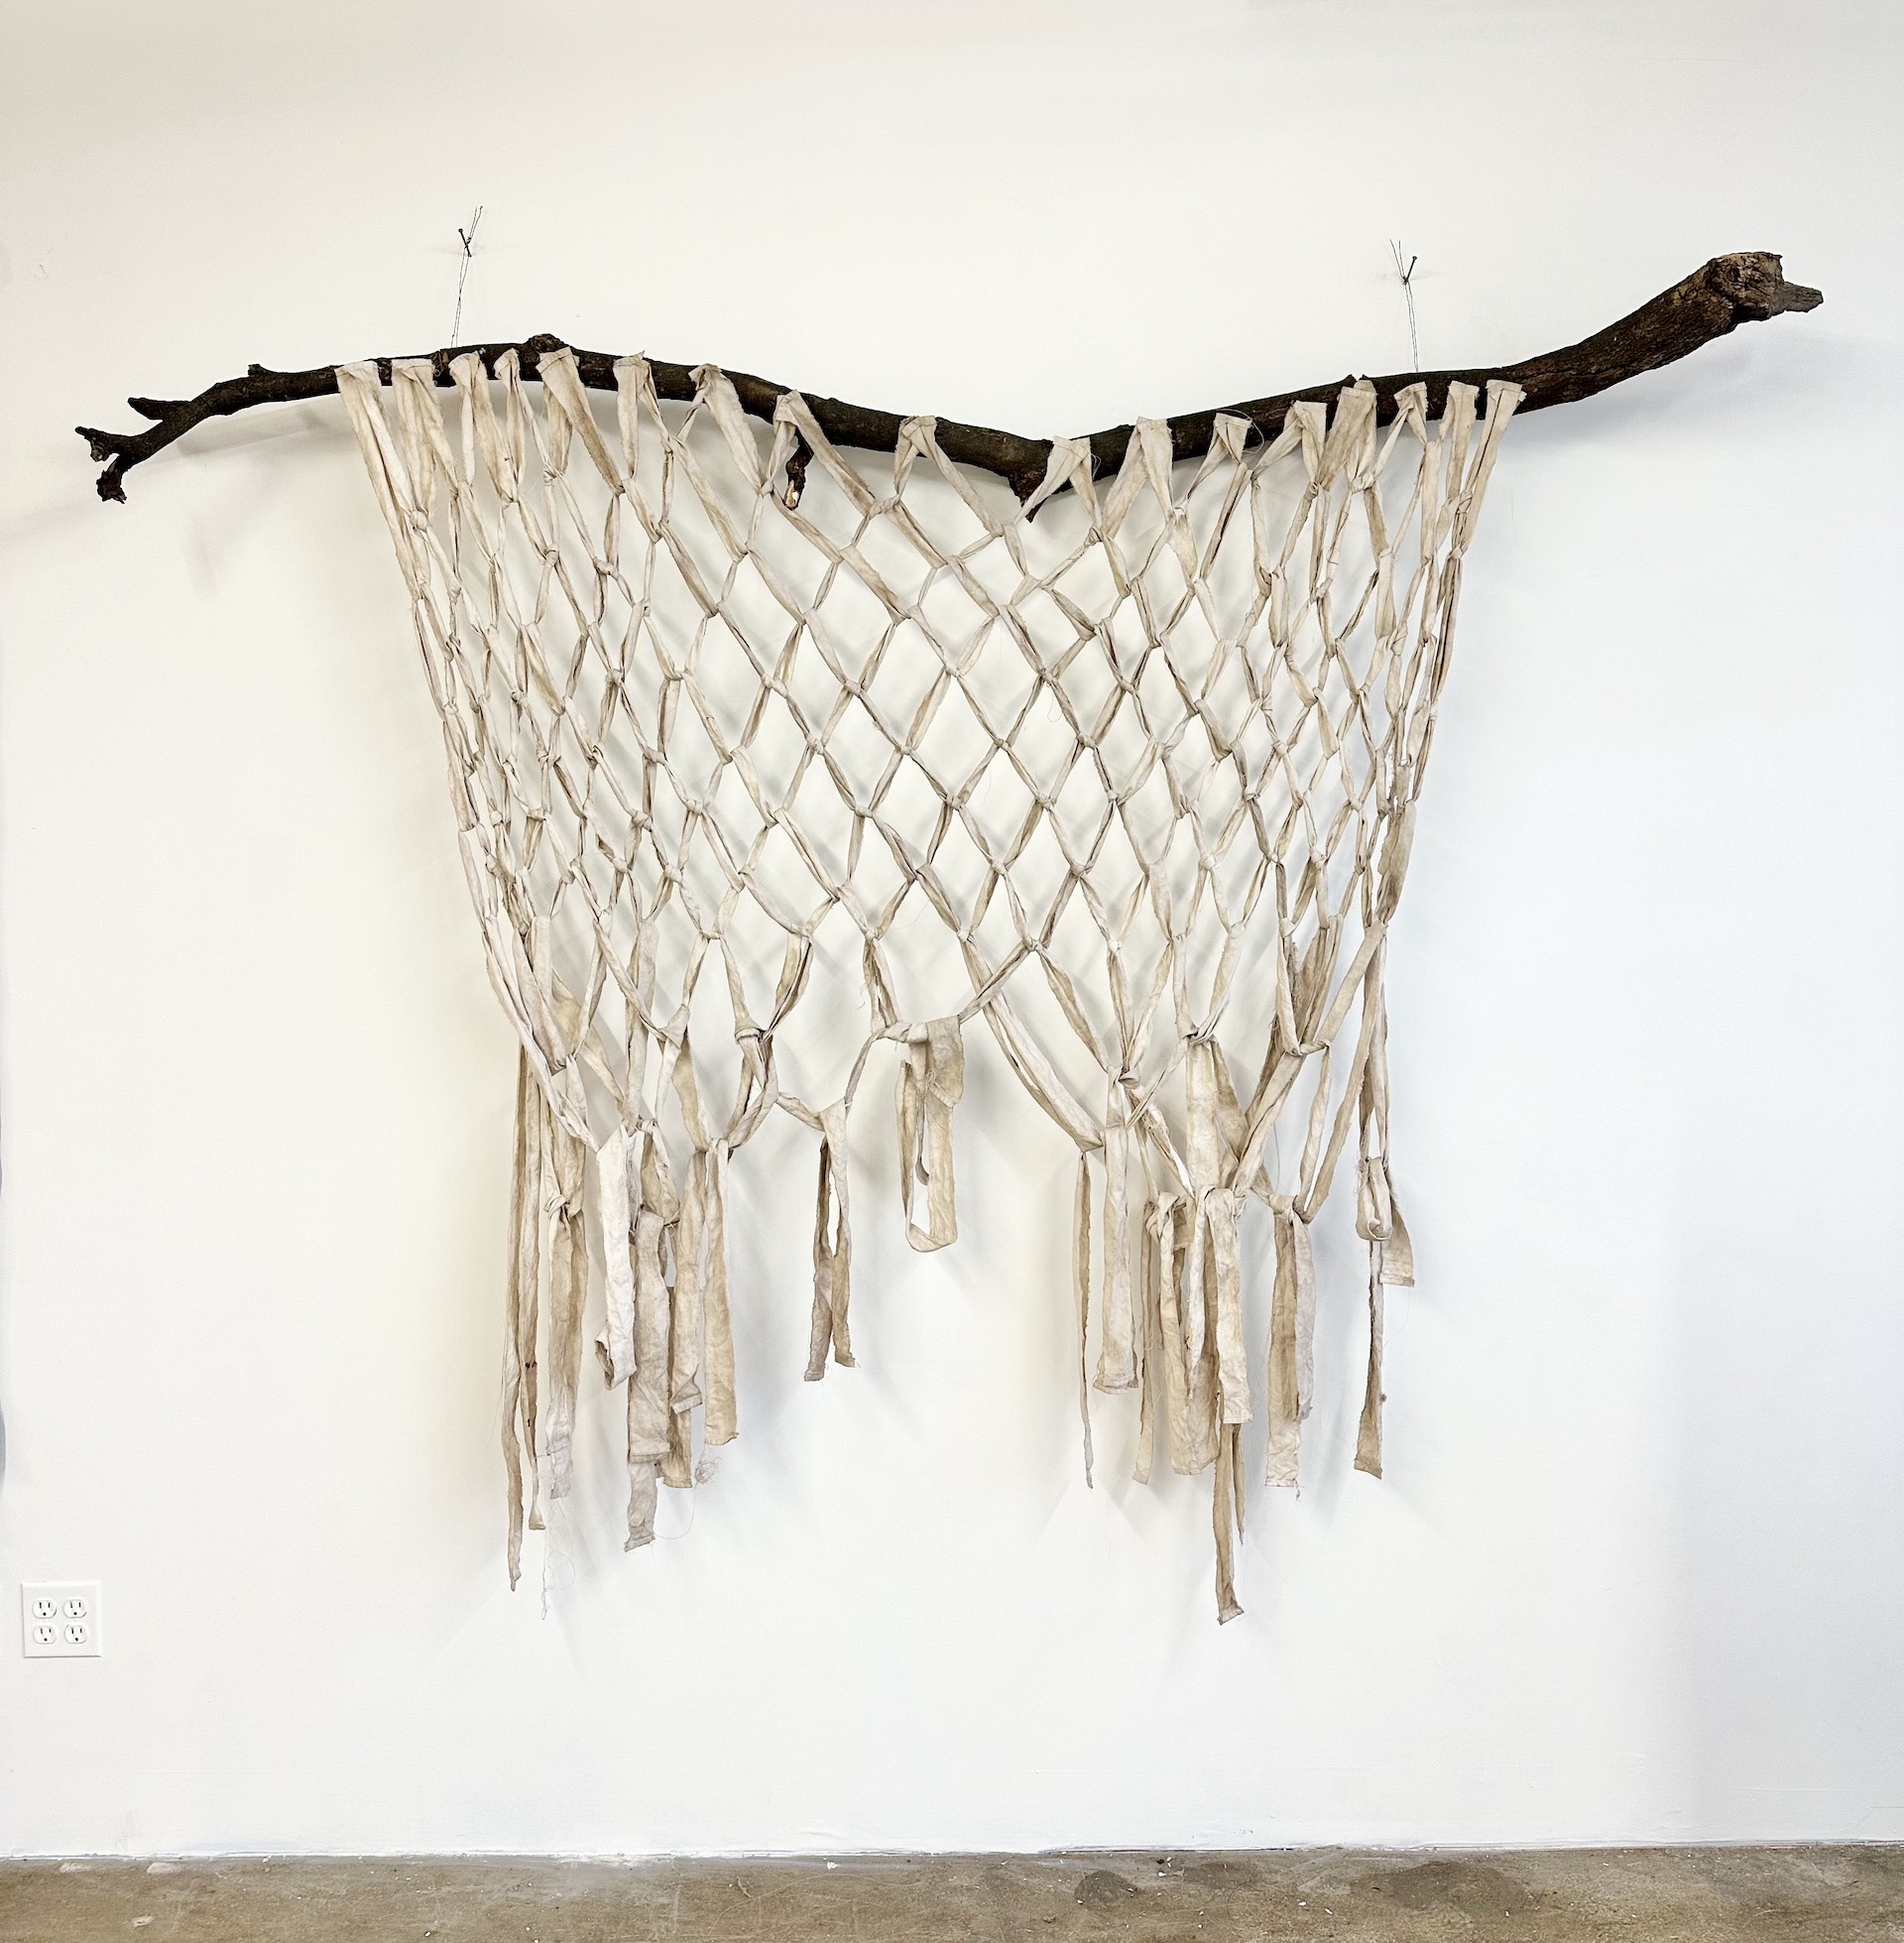 Two Works of Art Created Using Ecologically Sustainable Methods